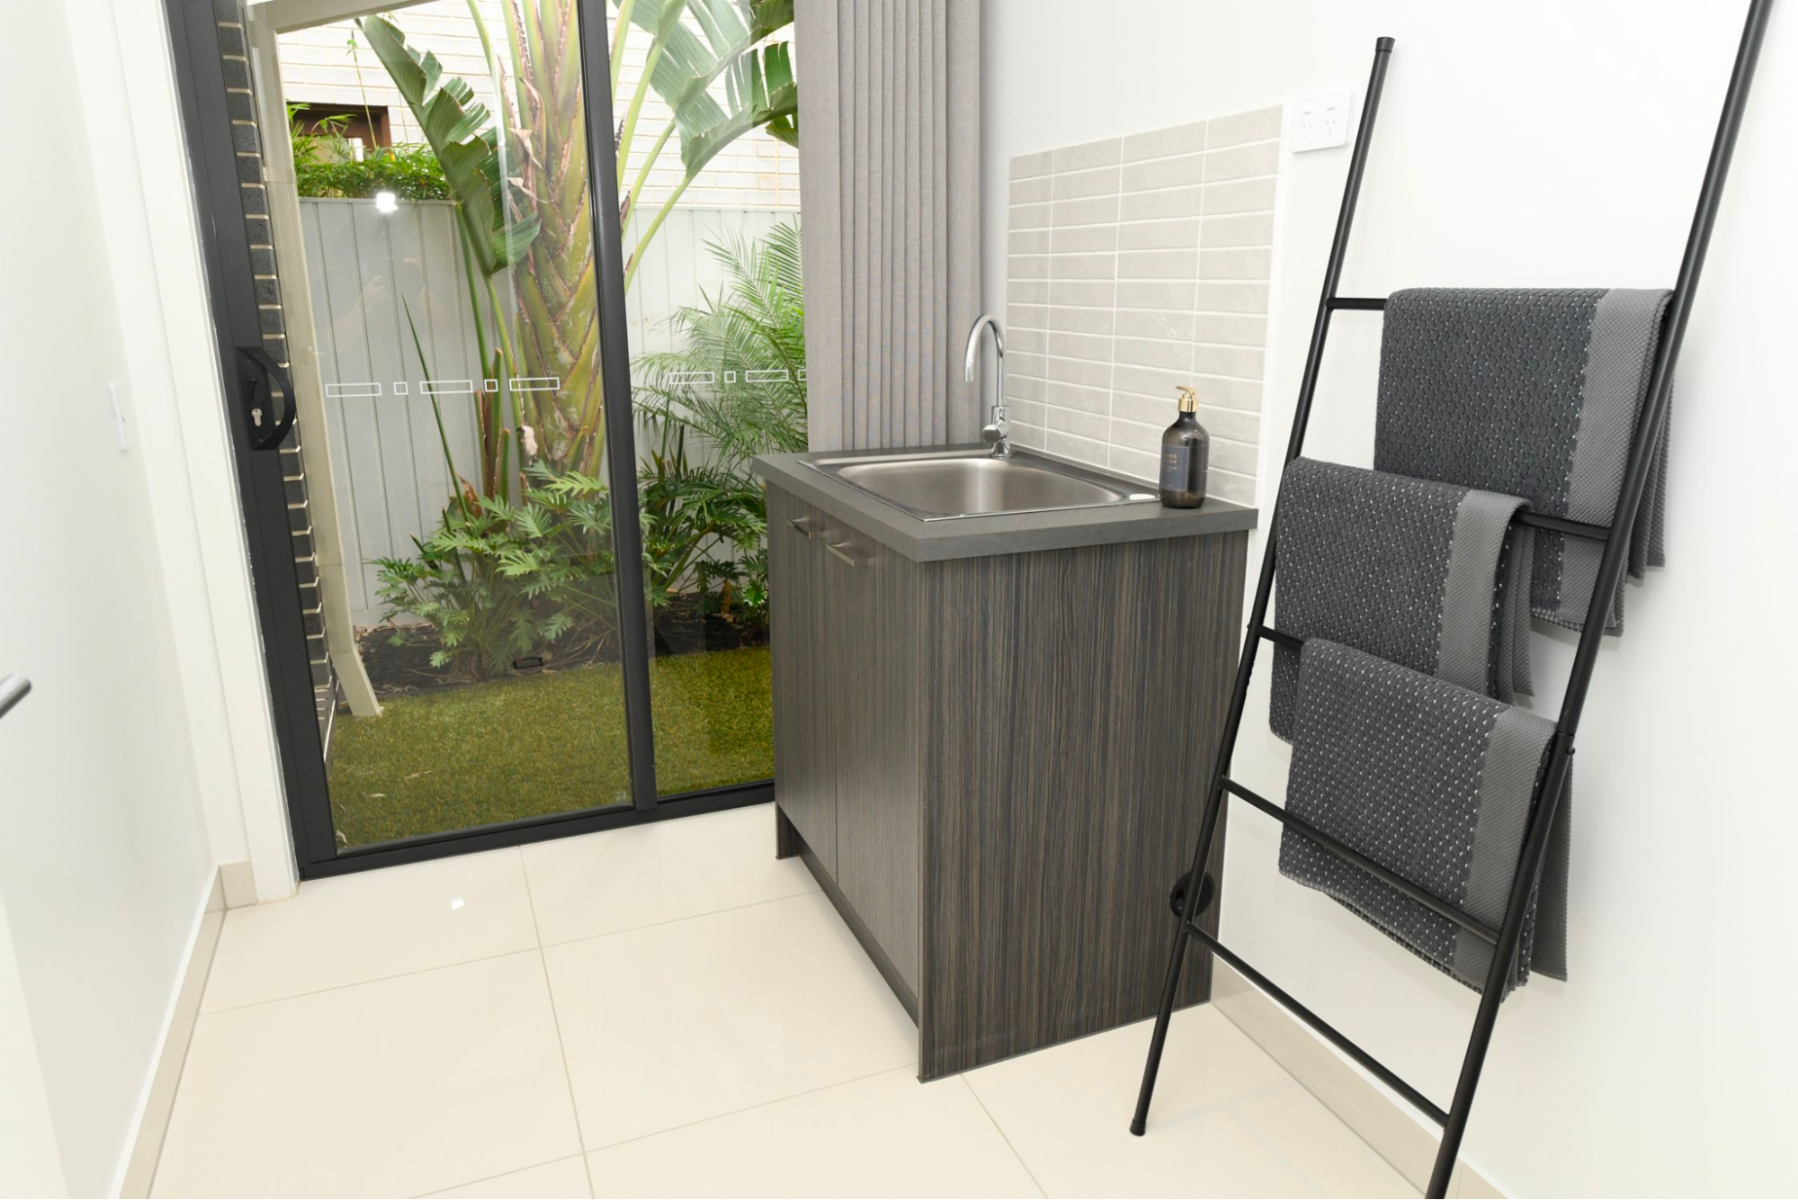 Washroom with vanity on right and splashback on its adjoining wall, sliding glass doors in the background